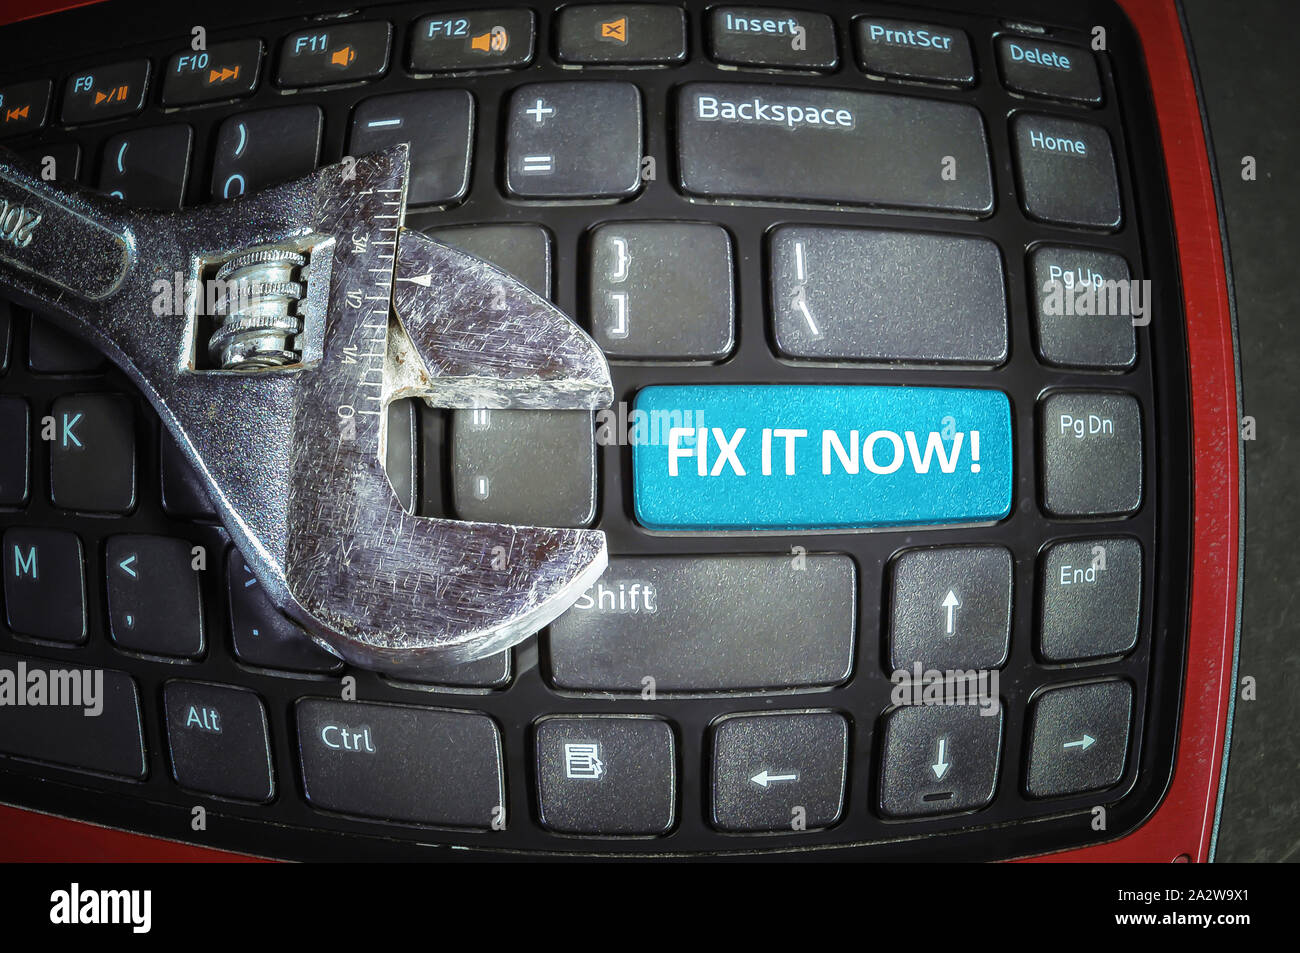 Fix it now blue button on a dirty computer keyboard with wrench tool. Fish eye effect. Stock Photo